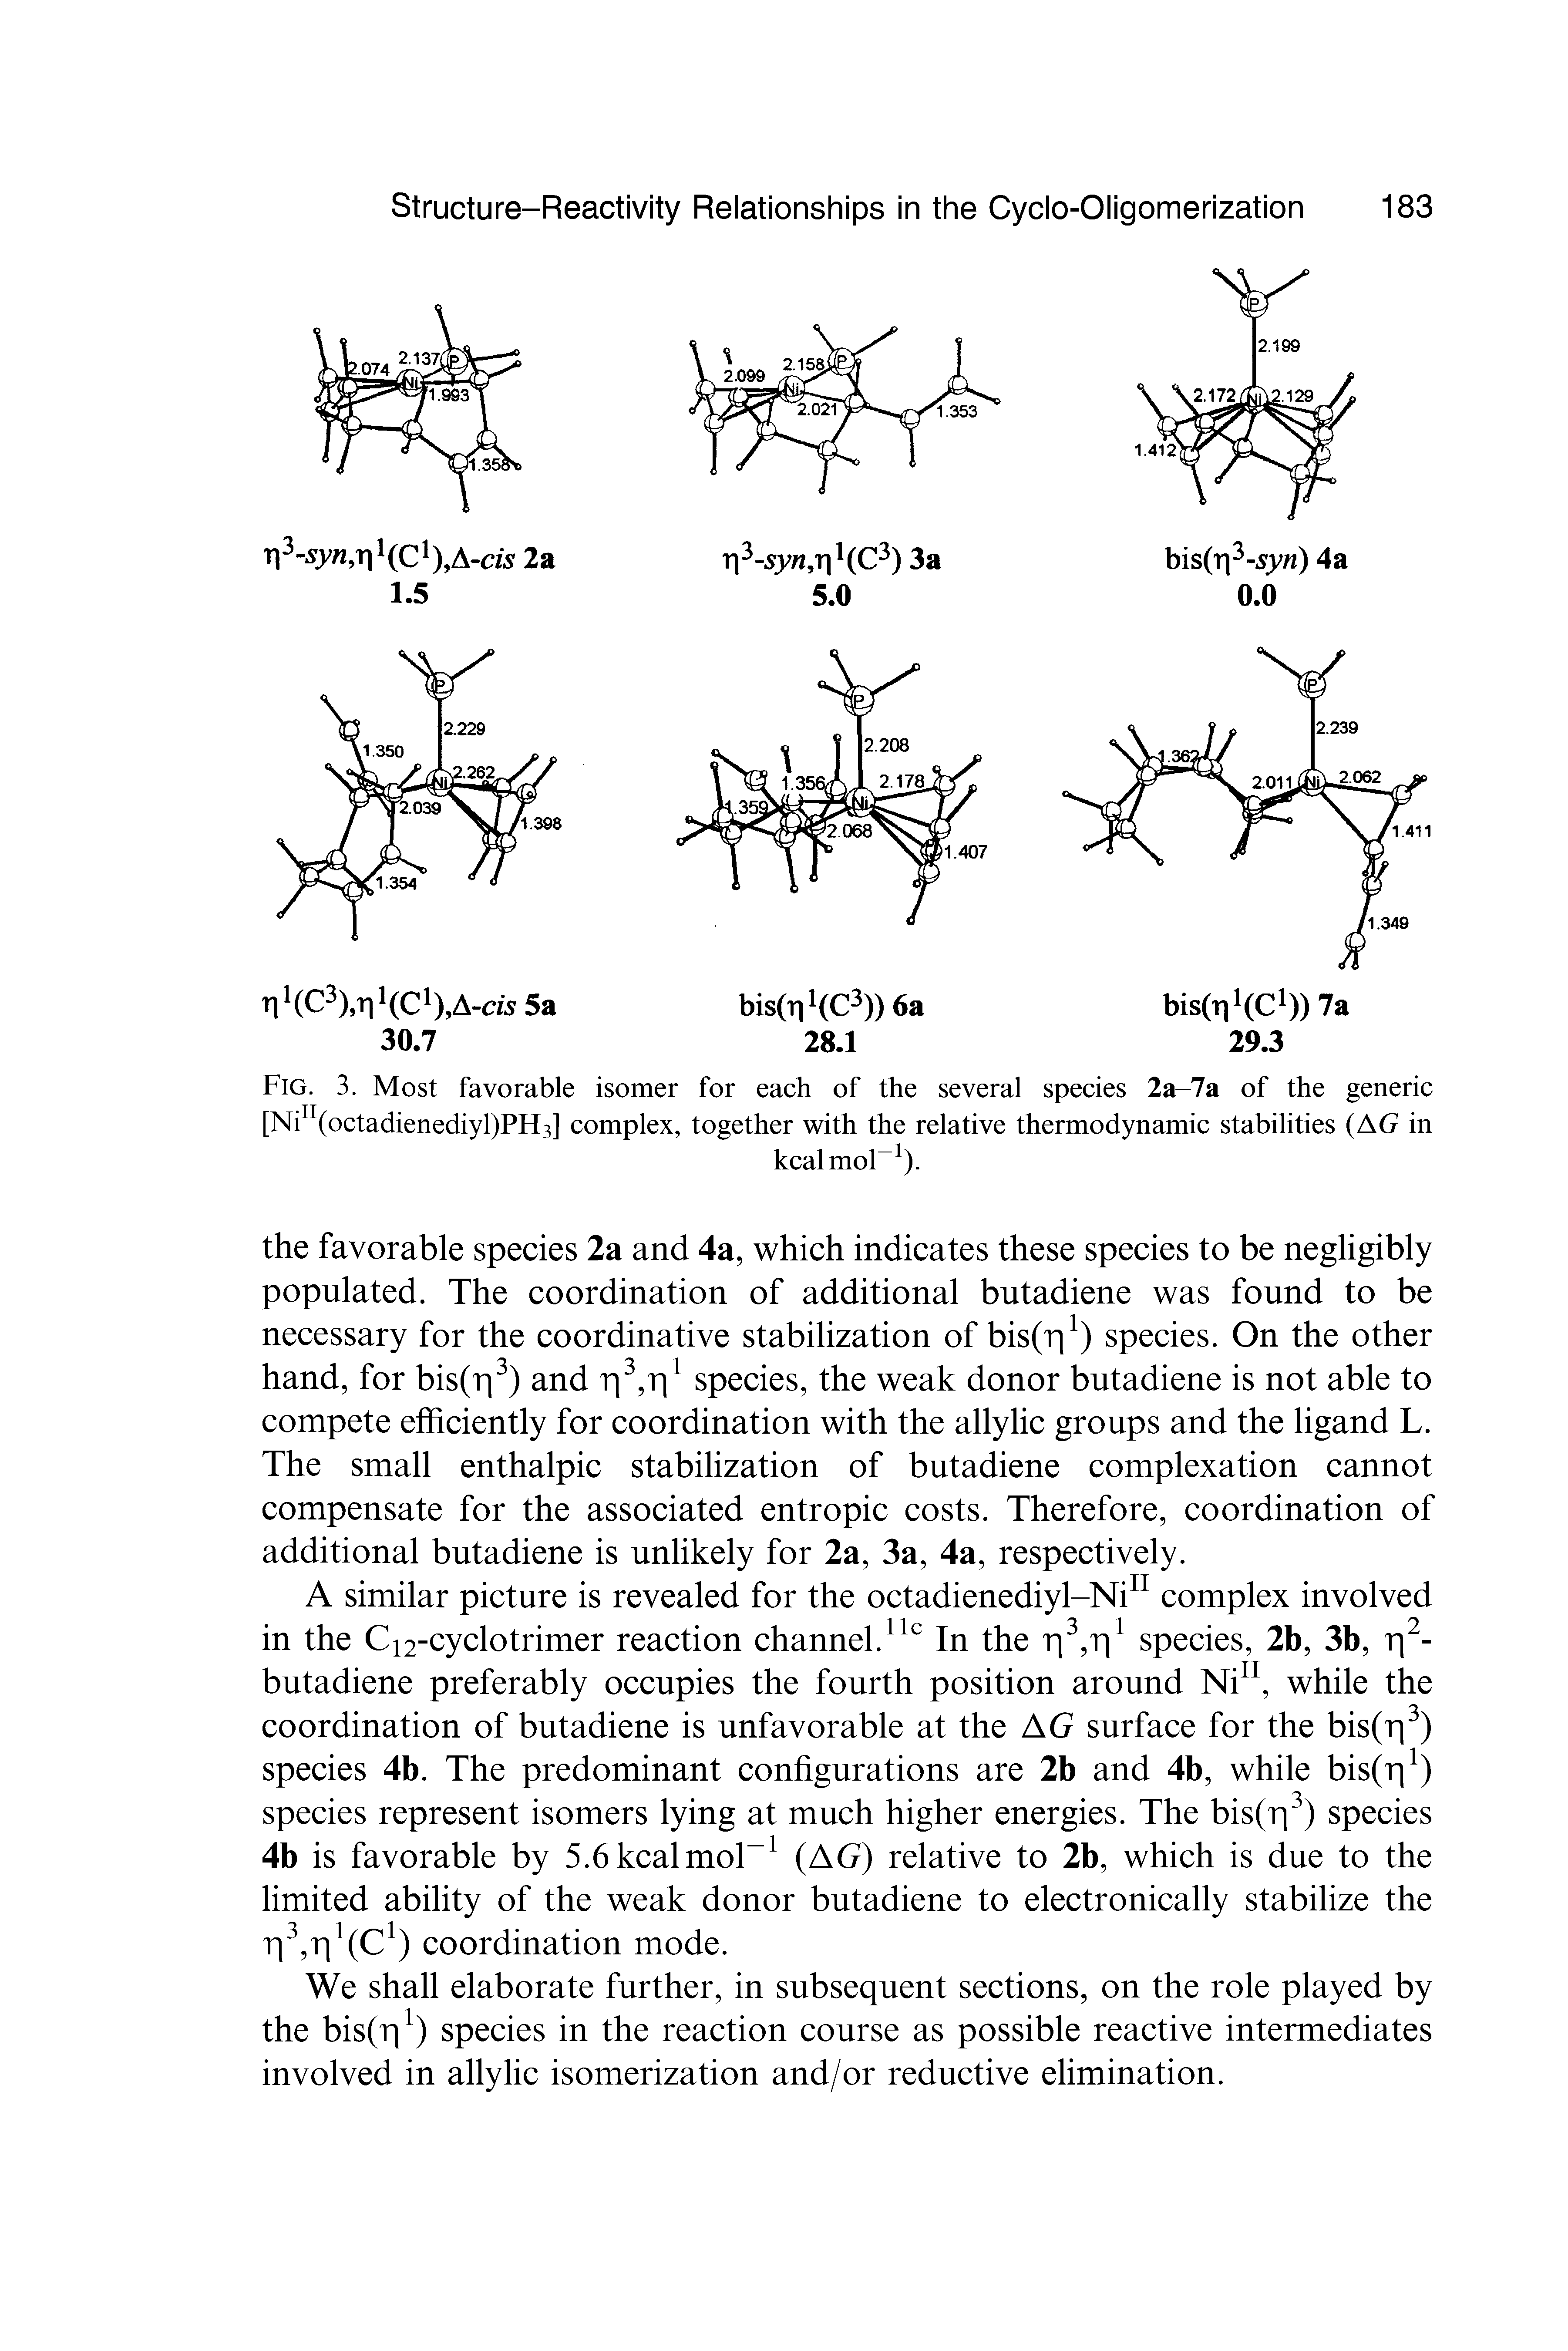 Fig. 3. Most favorable isomer for each of the several species 2a-7a of the generic [Nin(octadienediyl)PH3] complex, together with the relative thermodynamic stabilities (AG in...